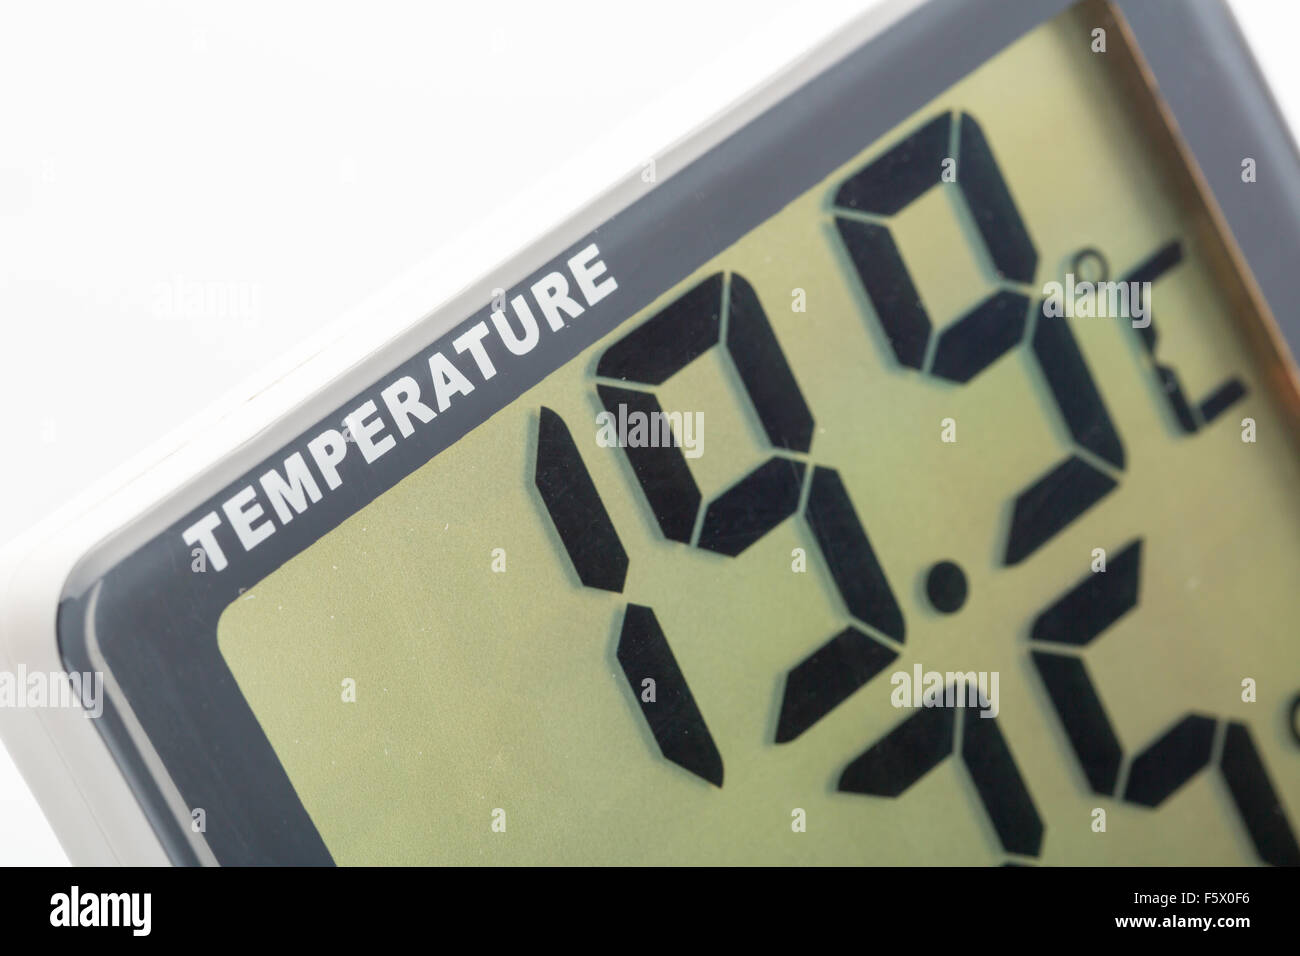 Closeup view of electronic thermometer Stock Photo